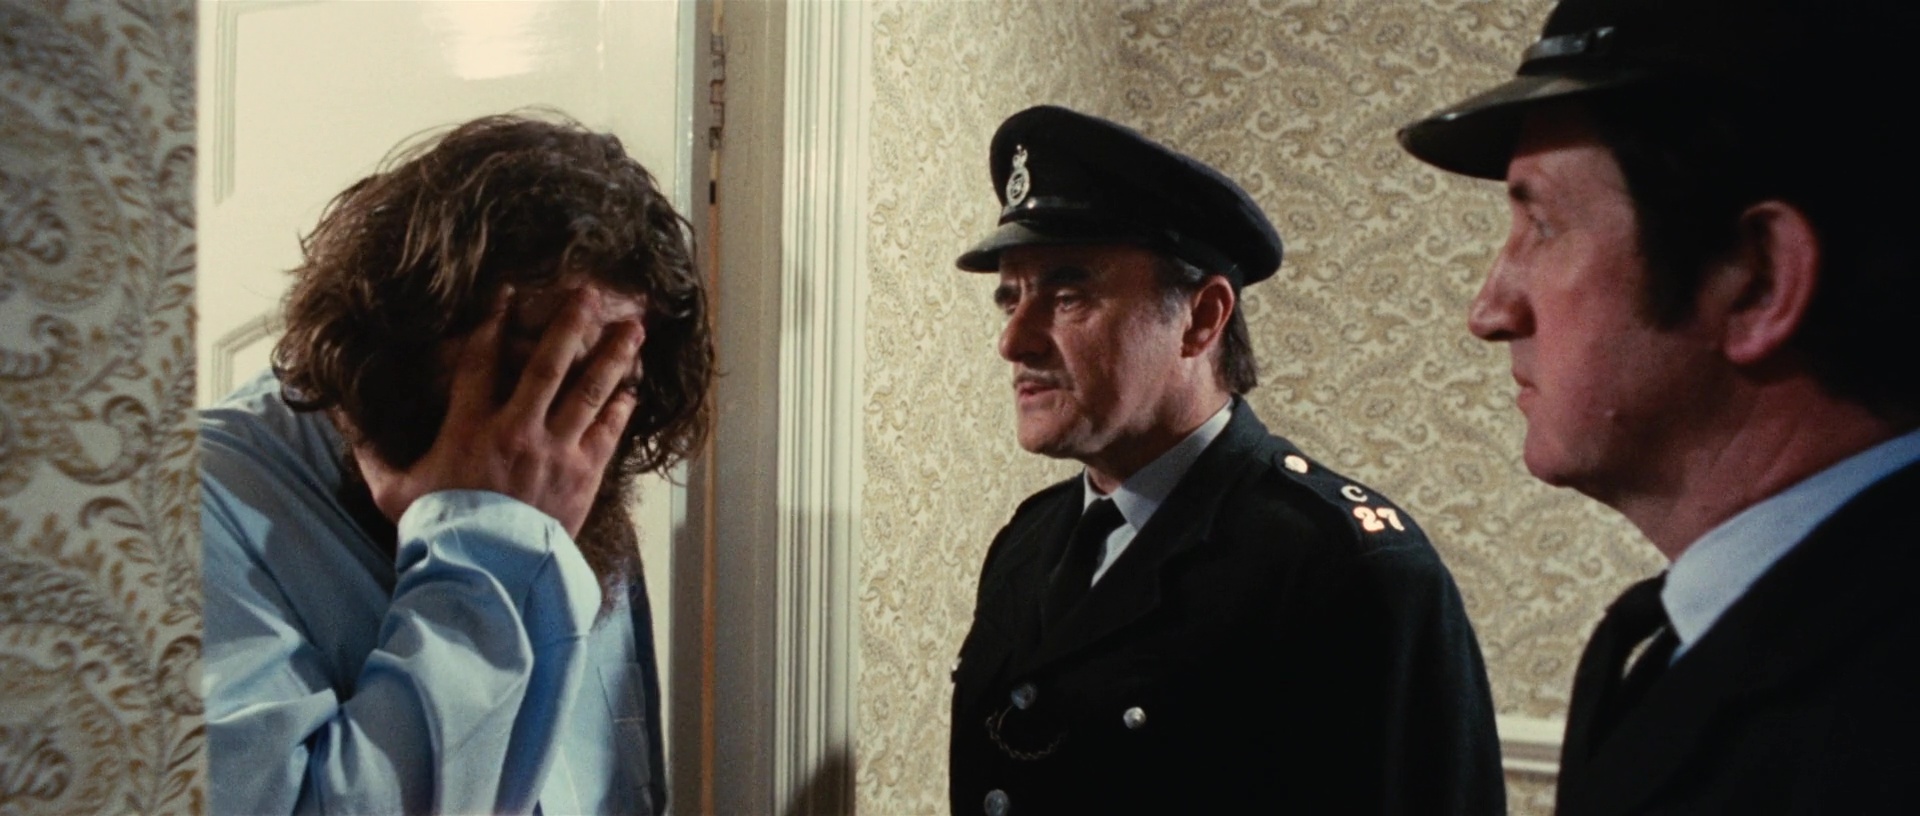 Cosa avete fatto a Solange (1973) UD Policeman neighbour 2.jpg